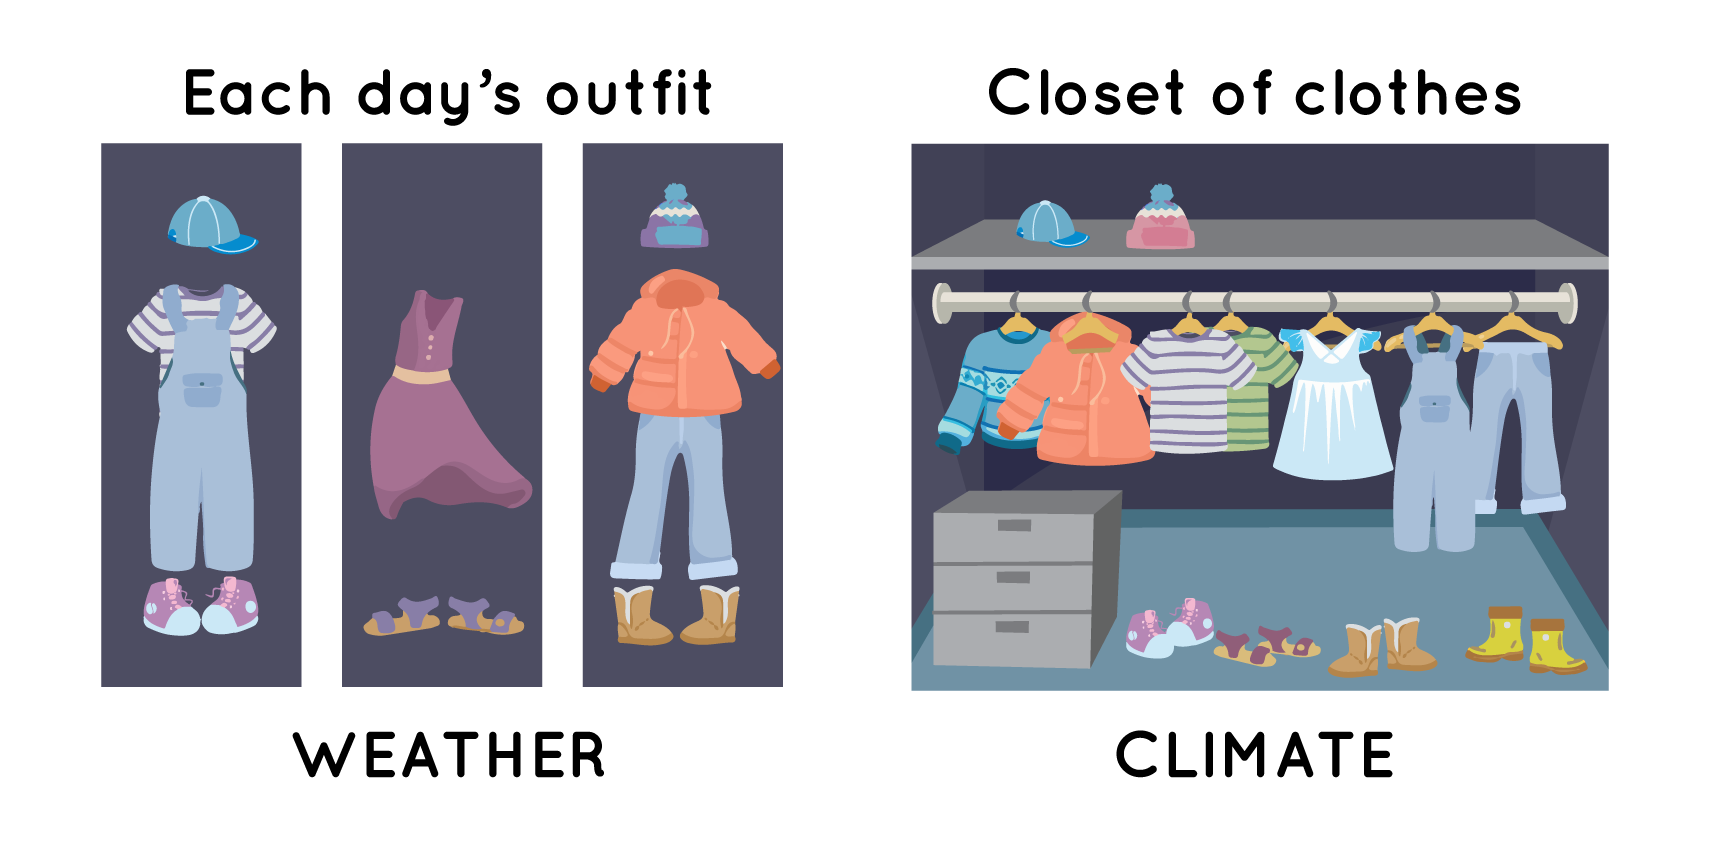 There are two illustrations. One the left is three blue rectangular boxes with a different outfit in each box. The first box has a blue baseball cap above a black and white striped shirt with blue pants overalls over it, and purple and white sneakers. The second box has a purple sleeveless dress above purple and tan sandals. The third box has a blue, white and purple winter hat, orange winter puffy coat, blue jeans, and tan colored winter boots. Above it is labeled 'Each day’s outfit' and below is labeled 'Weather.' On the left is an illustration of clothes in a closet. On top of a gray shelf are a blue baseball cap and pink, white and blue winter cap. Hanging on a white bar are several clothes, including a blue winter sweater, orange winter puffy coat, a black and white striped shirt, a green striped shirt, a light blue and white dress, blue jean overalls, and blue jeans. There is a gray three-drawer chest on the left of a blue carpet. Next to them are four pairs of shoes. There are purple and white sneakers, tan sandals, tan winter boots, and yellow rain boots. The walls of the closet are blue. Above the illustration is labeled 'Closet of clothes,' and below is labeled 'Climate.'